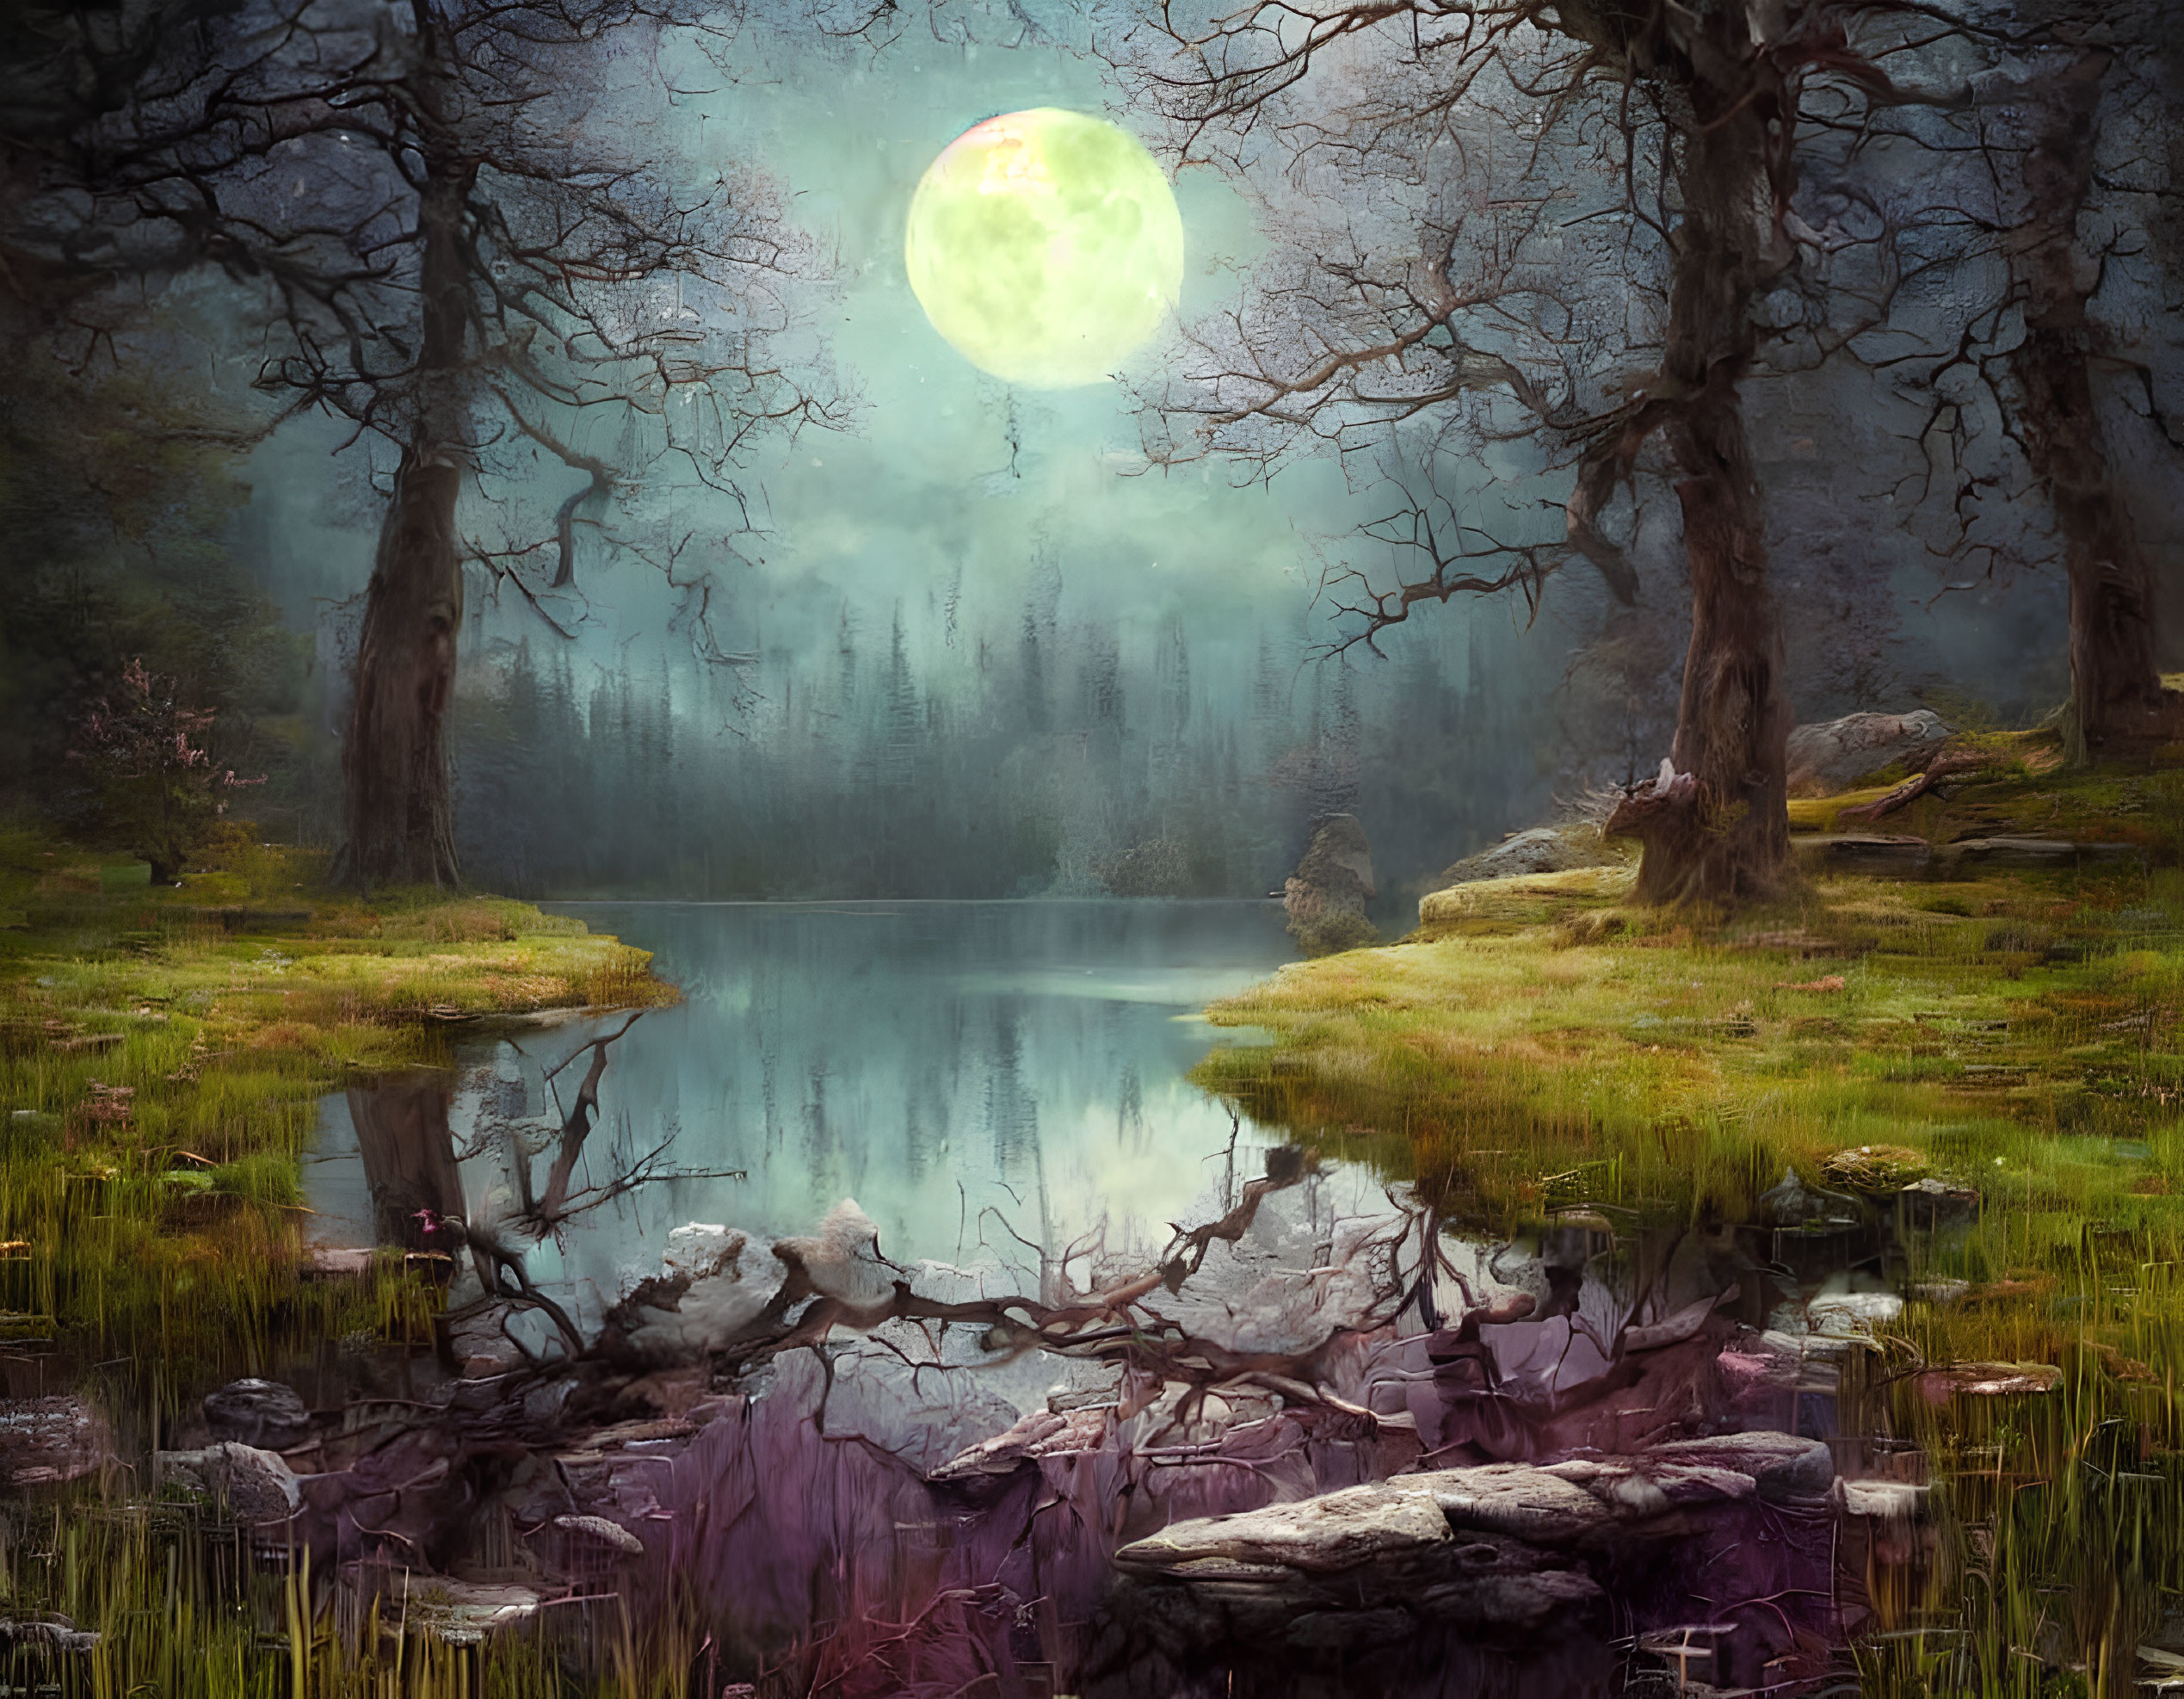 Mystical forest scene with glowing full moon and tranquil lake